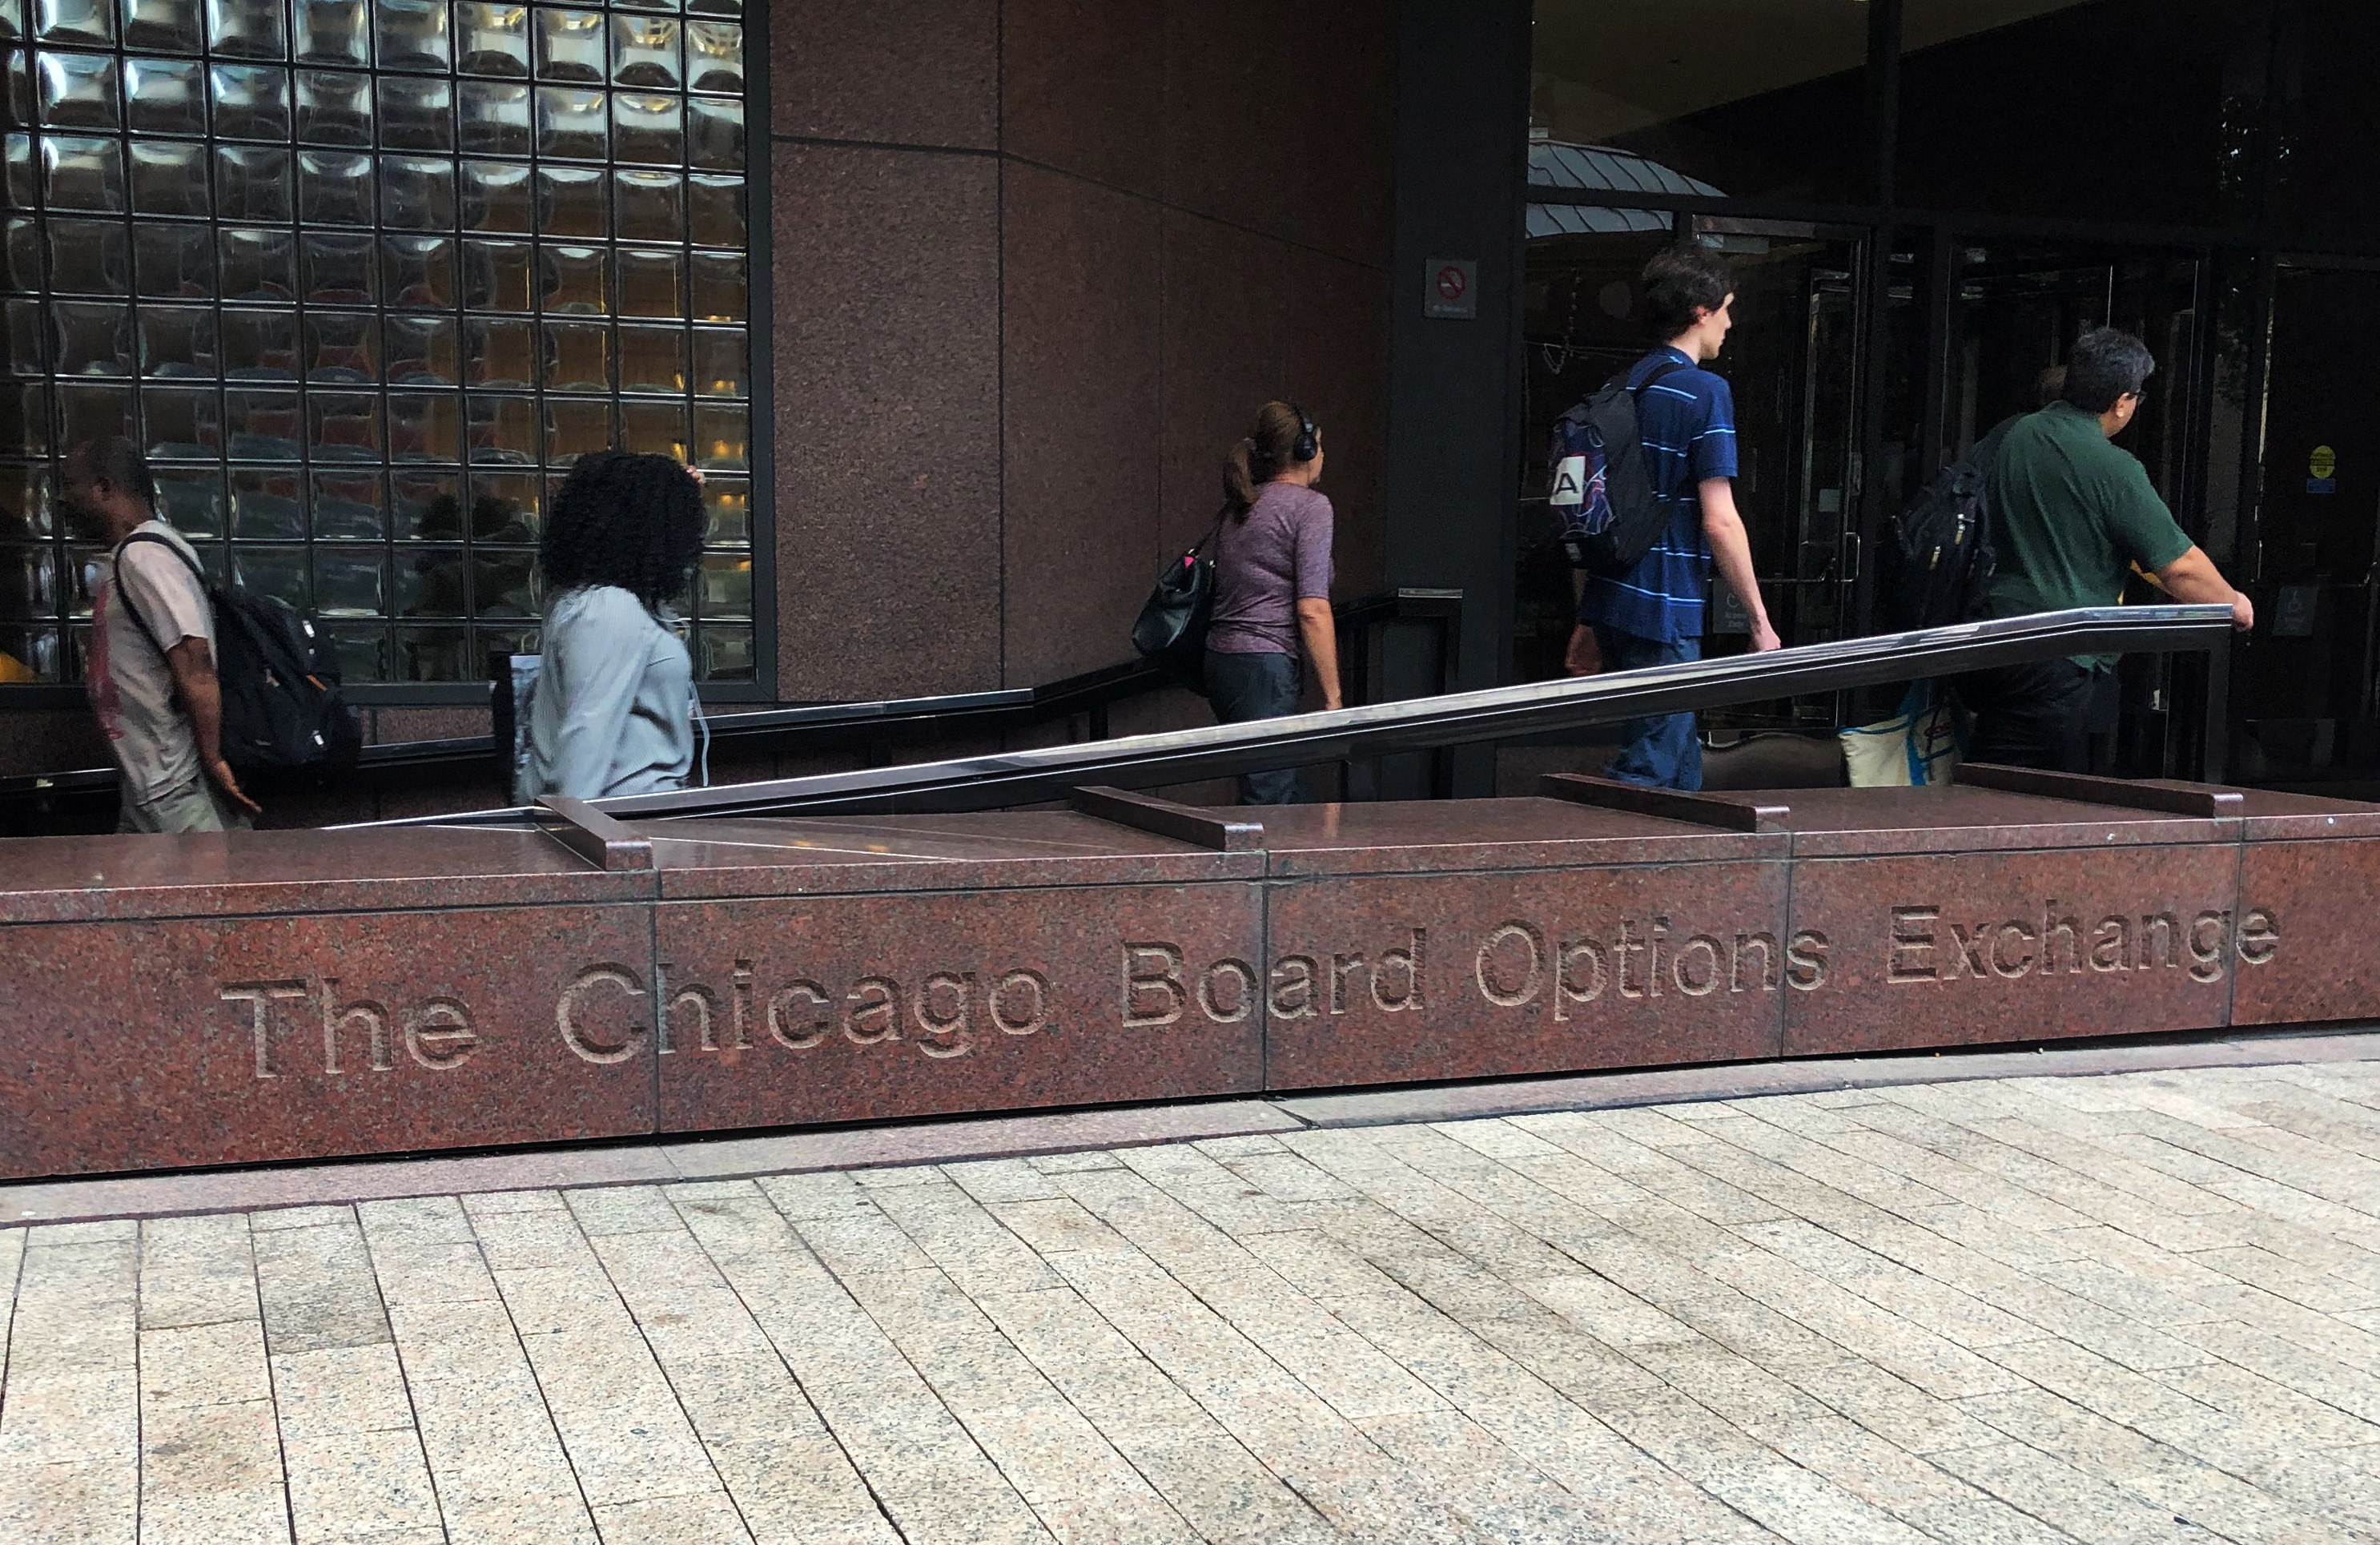 Chicago Board Options Exchange Global Markets headquarters building in Chicago